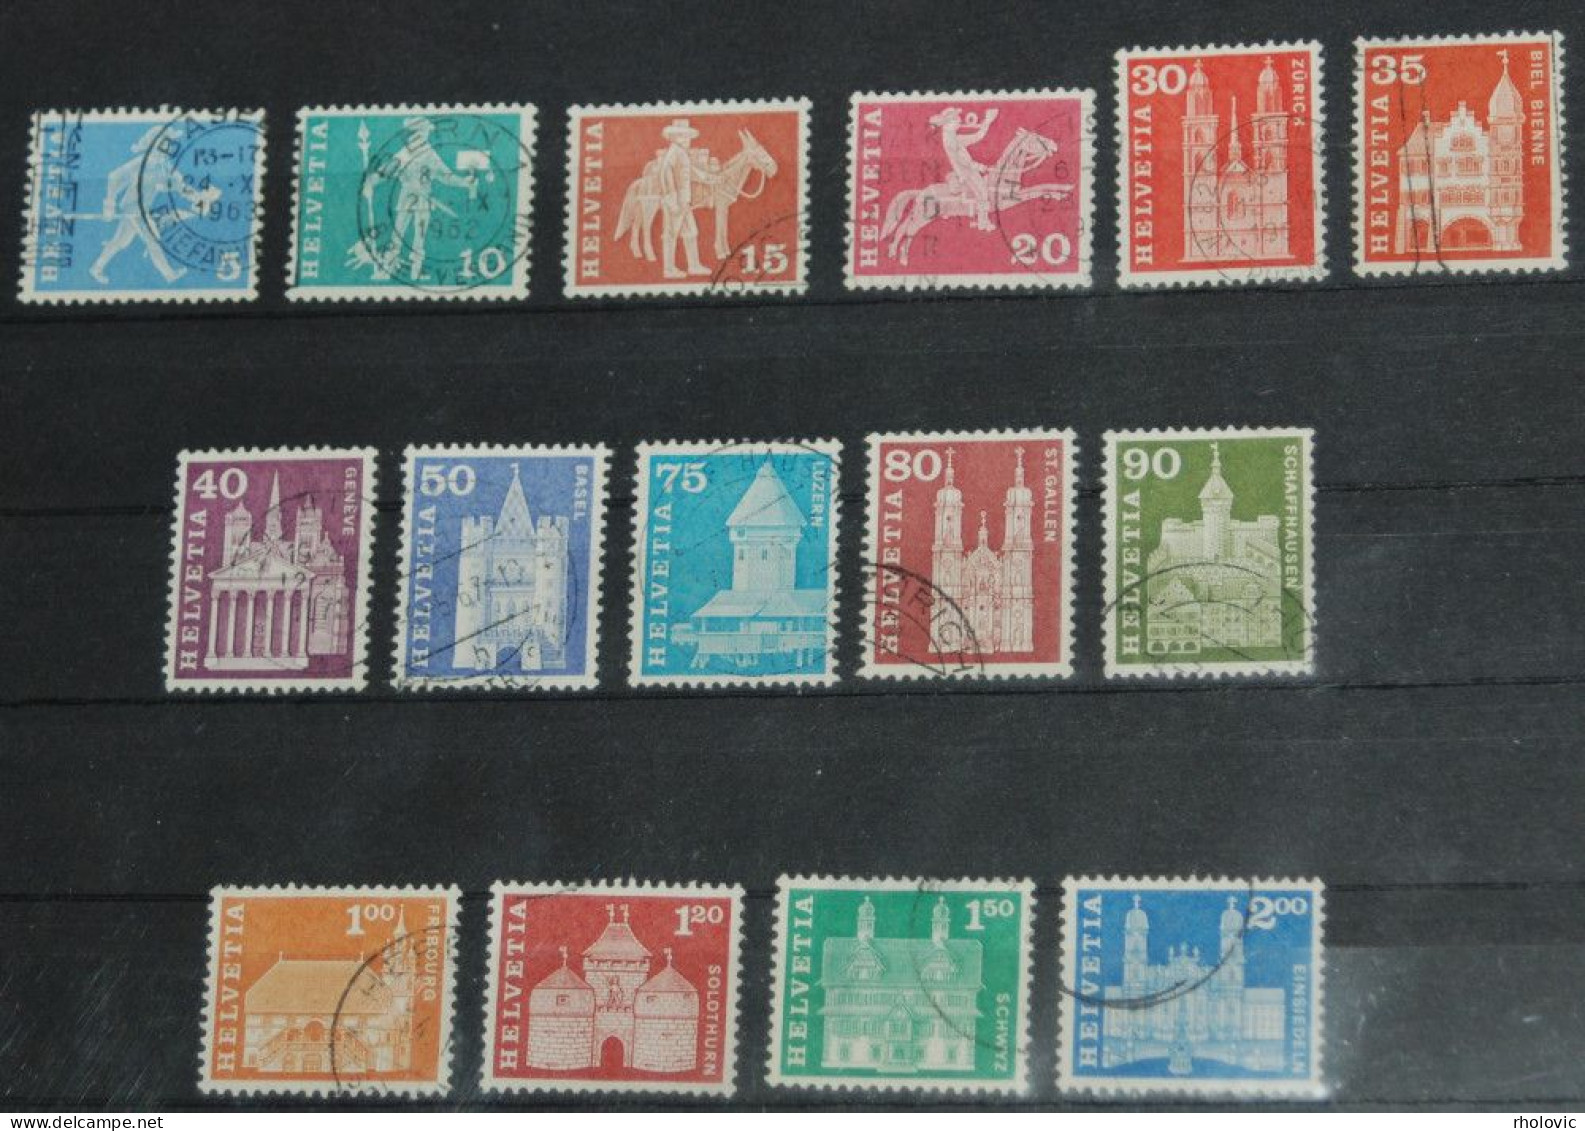 SWITZERLAND 1960, Postal History, Monuments, Buildings, Architecture, Used - Monuments